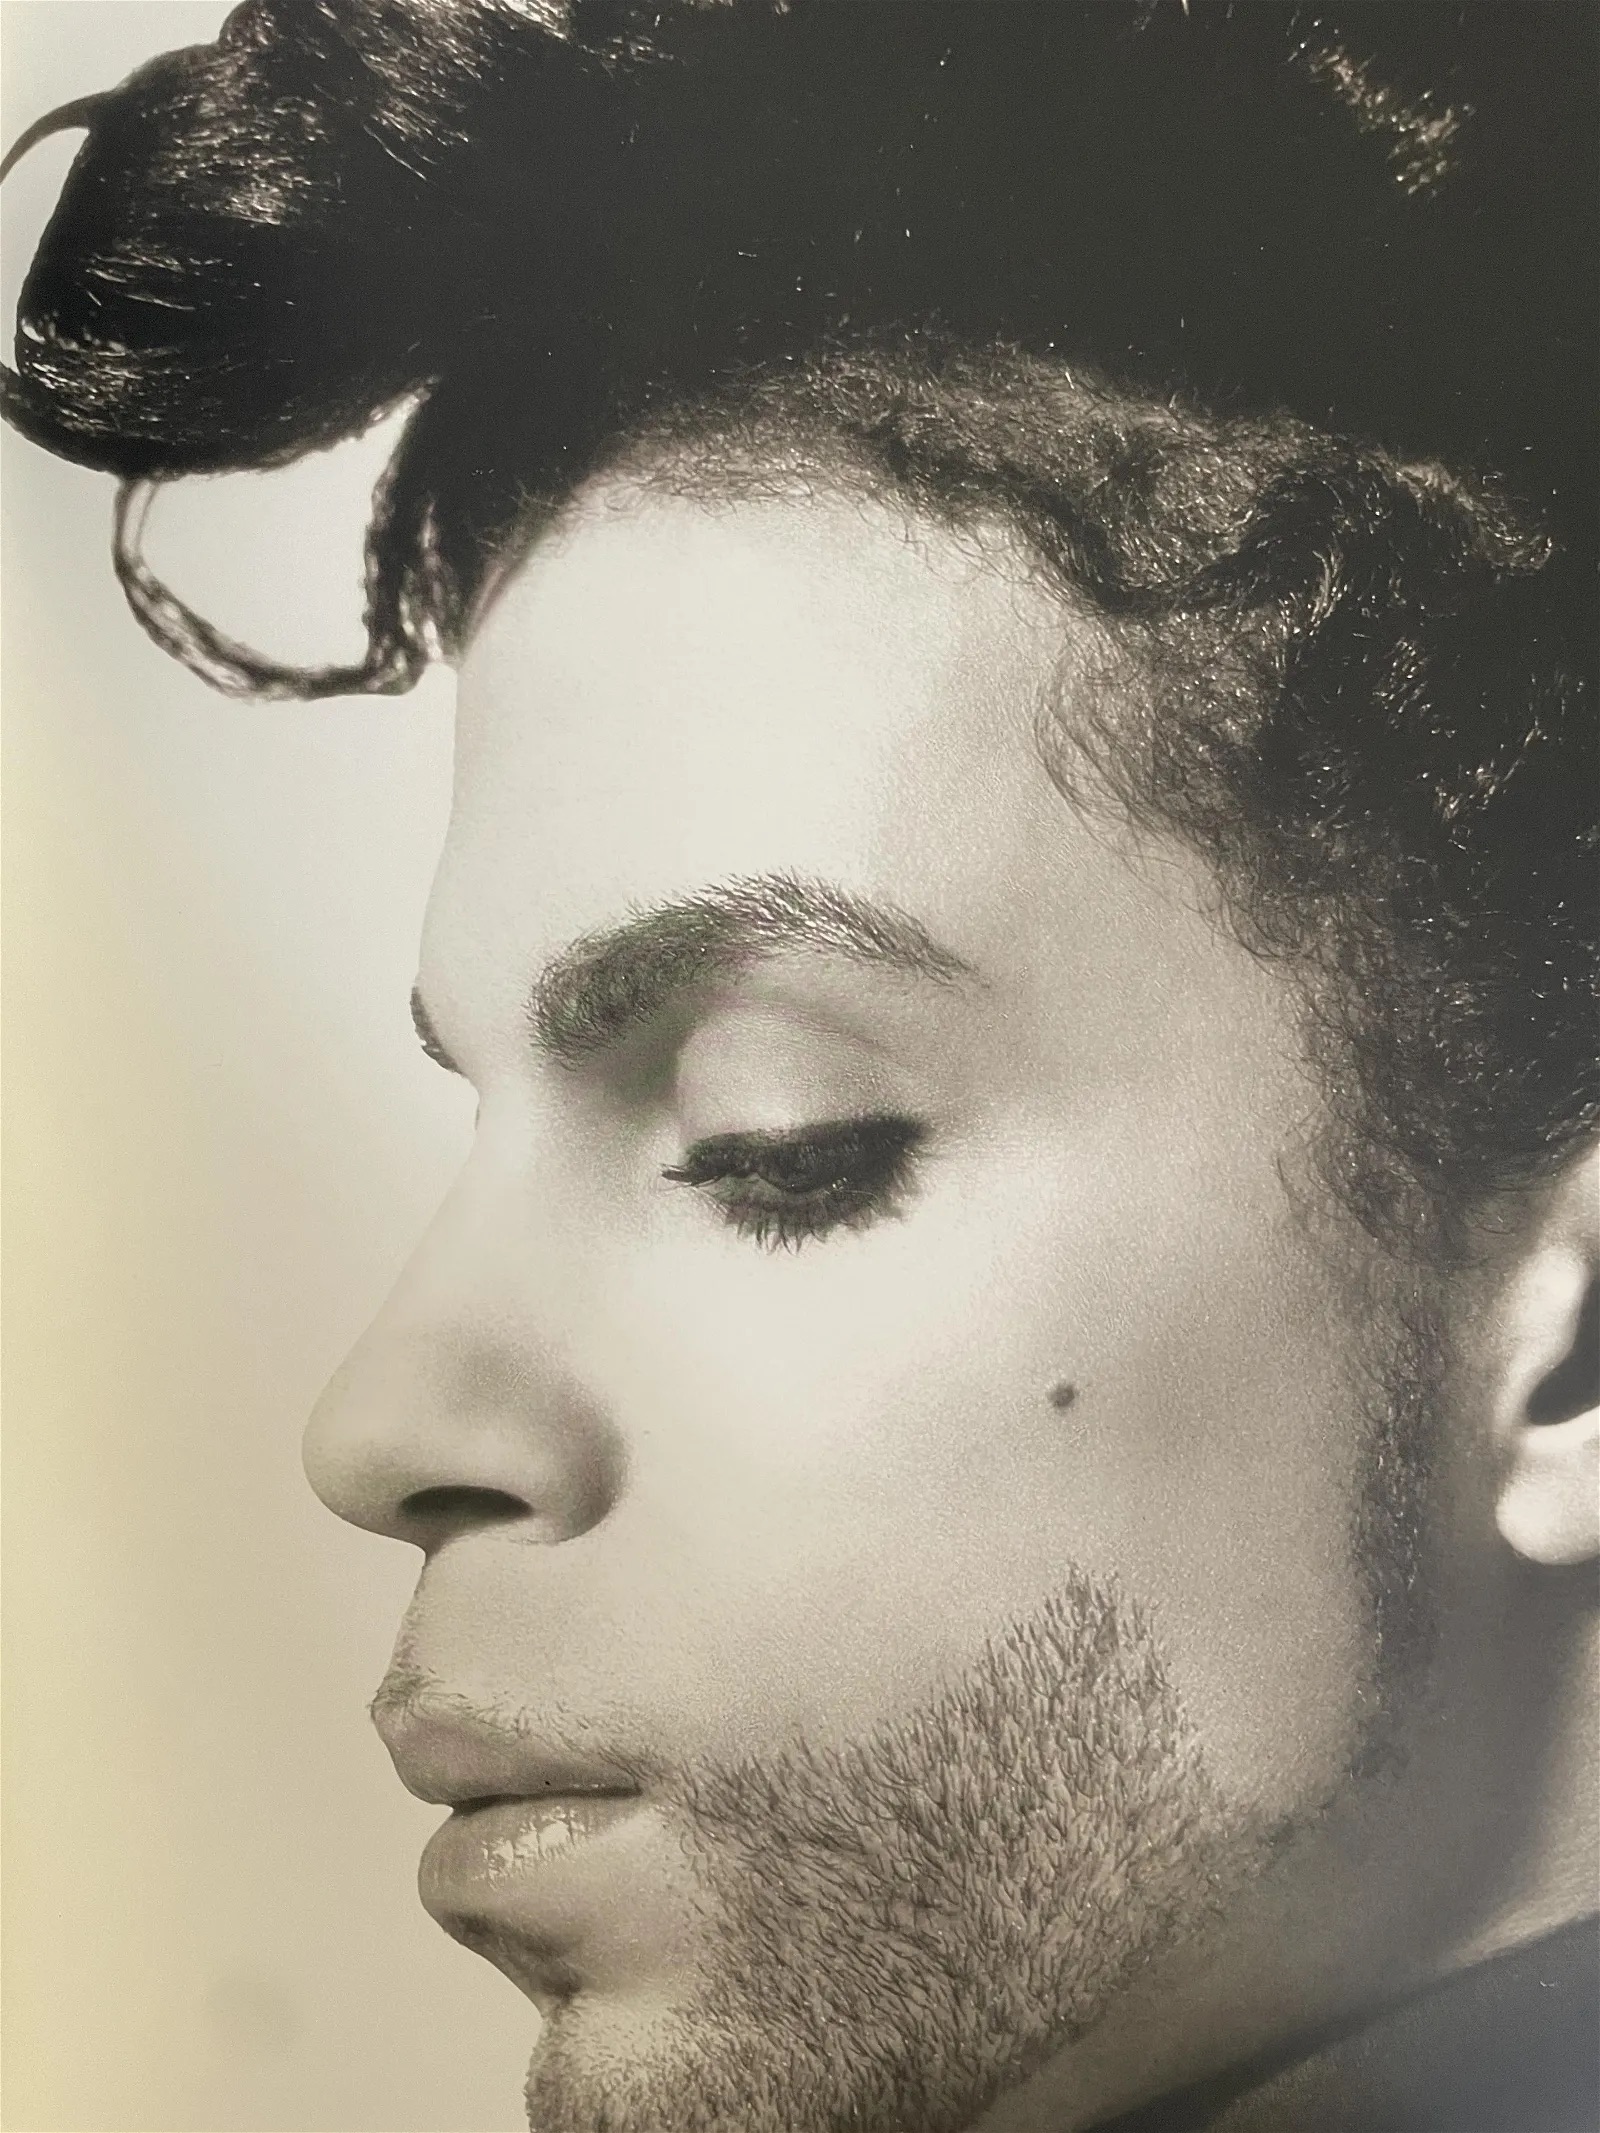 Herb Ritts "Prince, Minneapolis, 1991" Print - Image 3 of 6